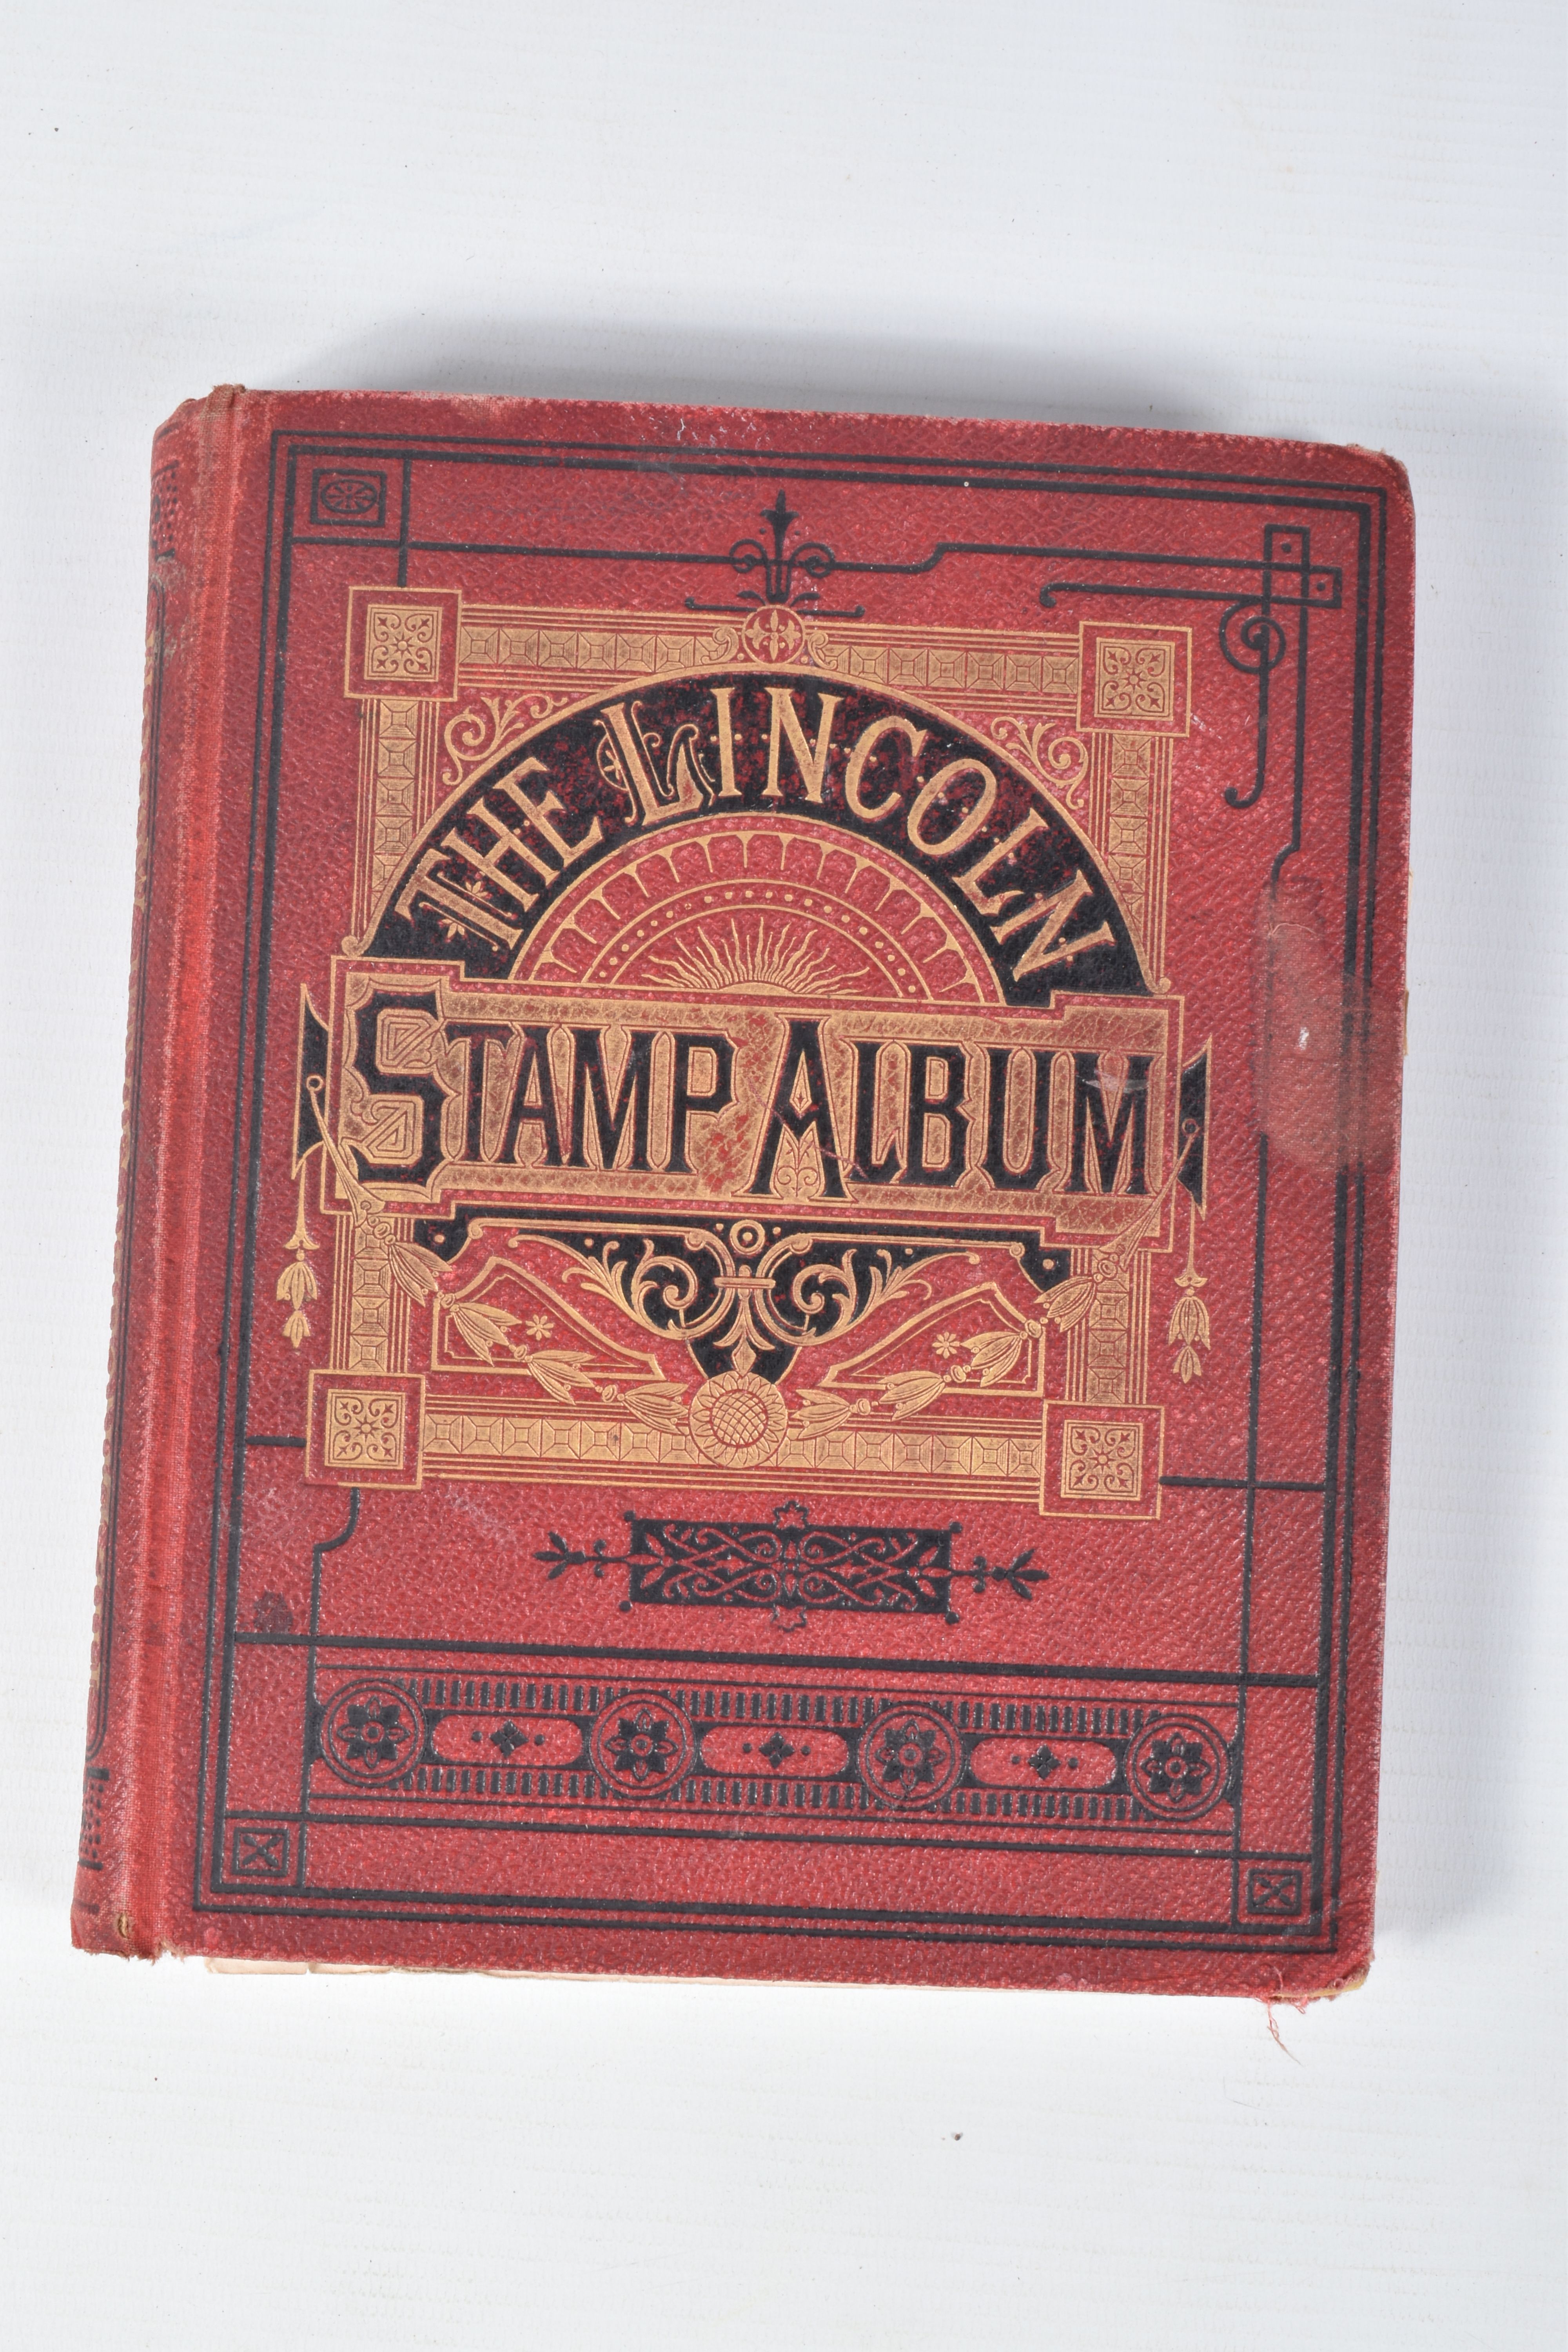 STAMP COLLECTION IN 2 SMALL CASES. We note 2 Strand type albums with multi-generation collectionm - Image 17 of 23